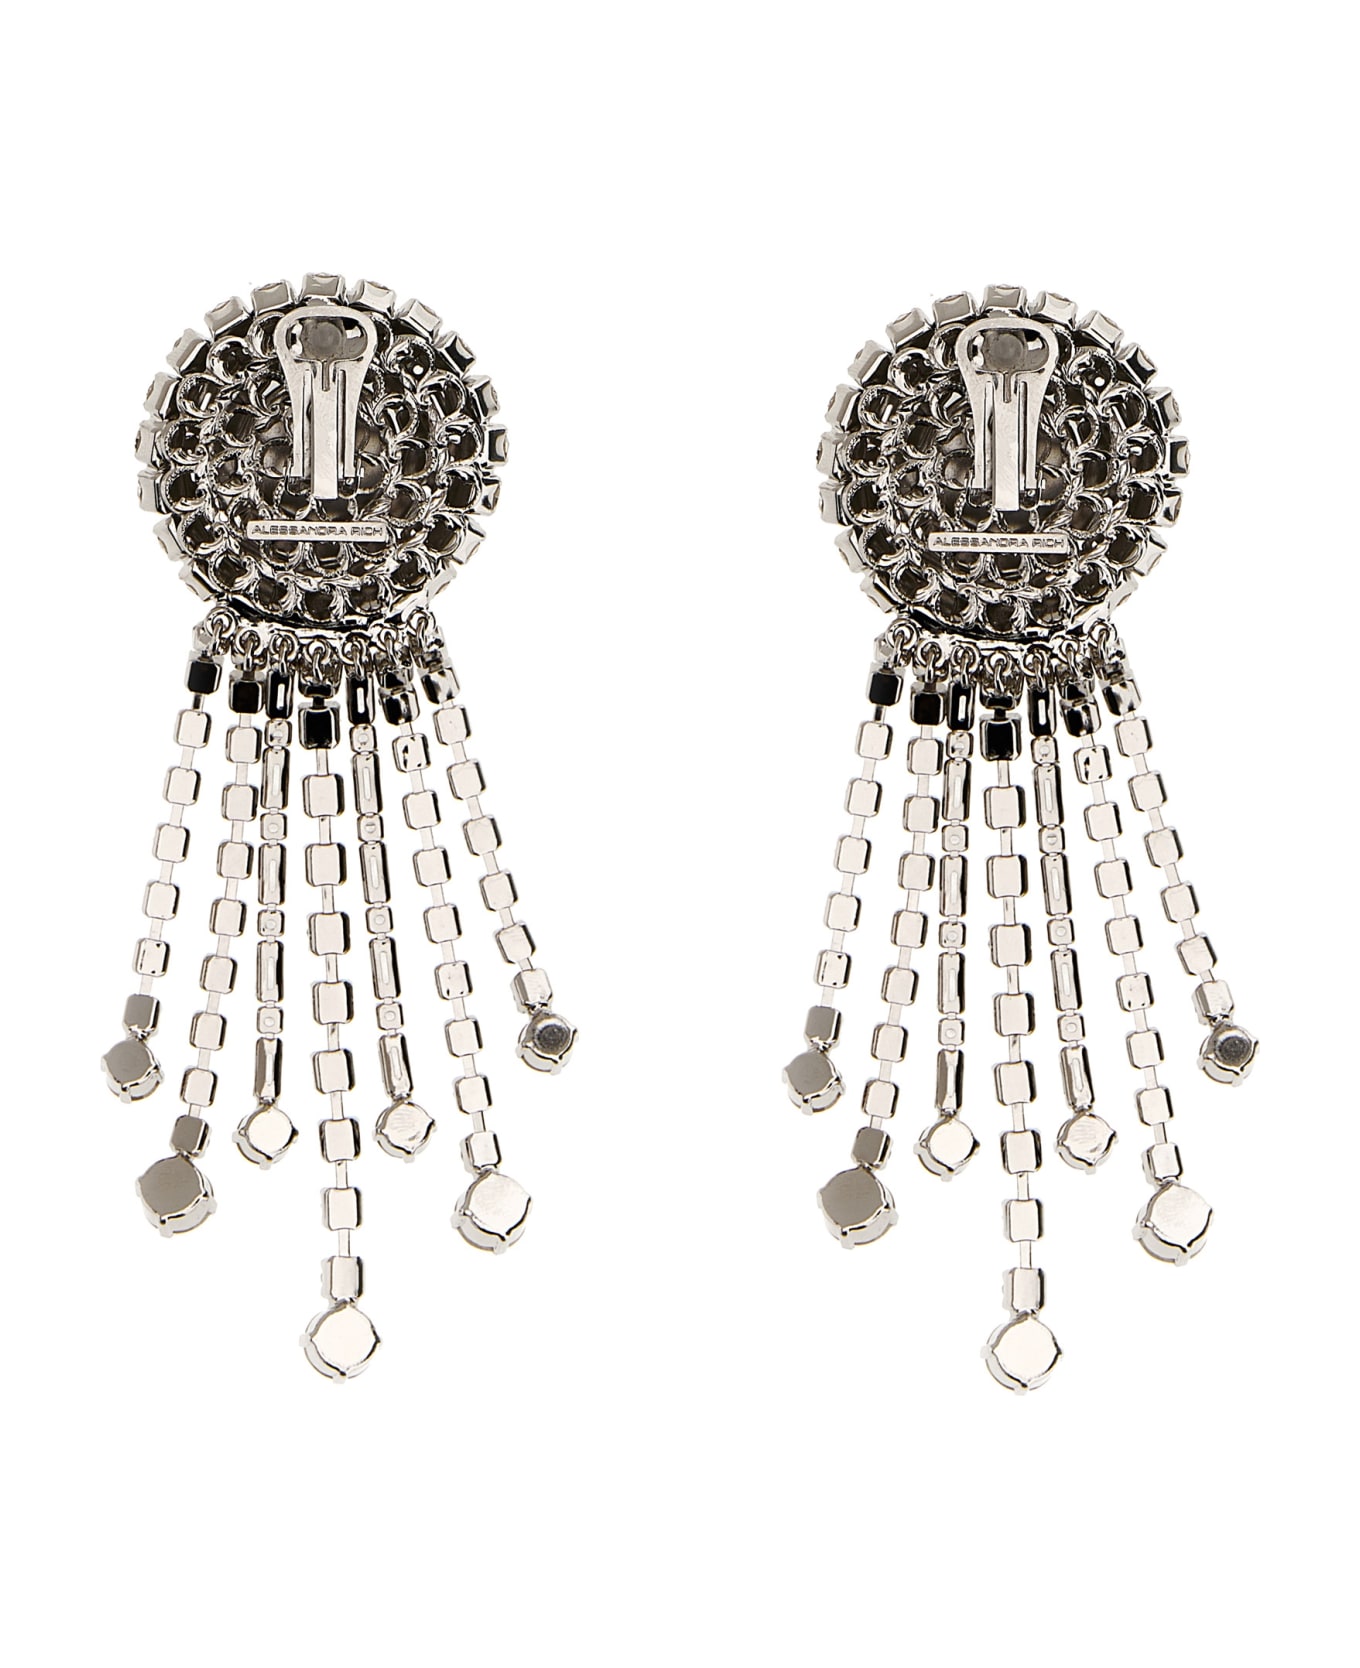 Alessandra Rich 'round' Earrings - Silver